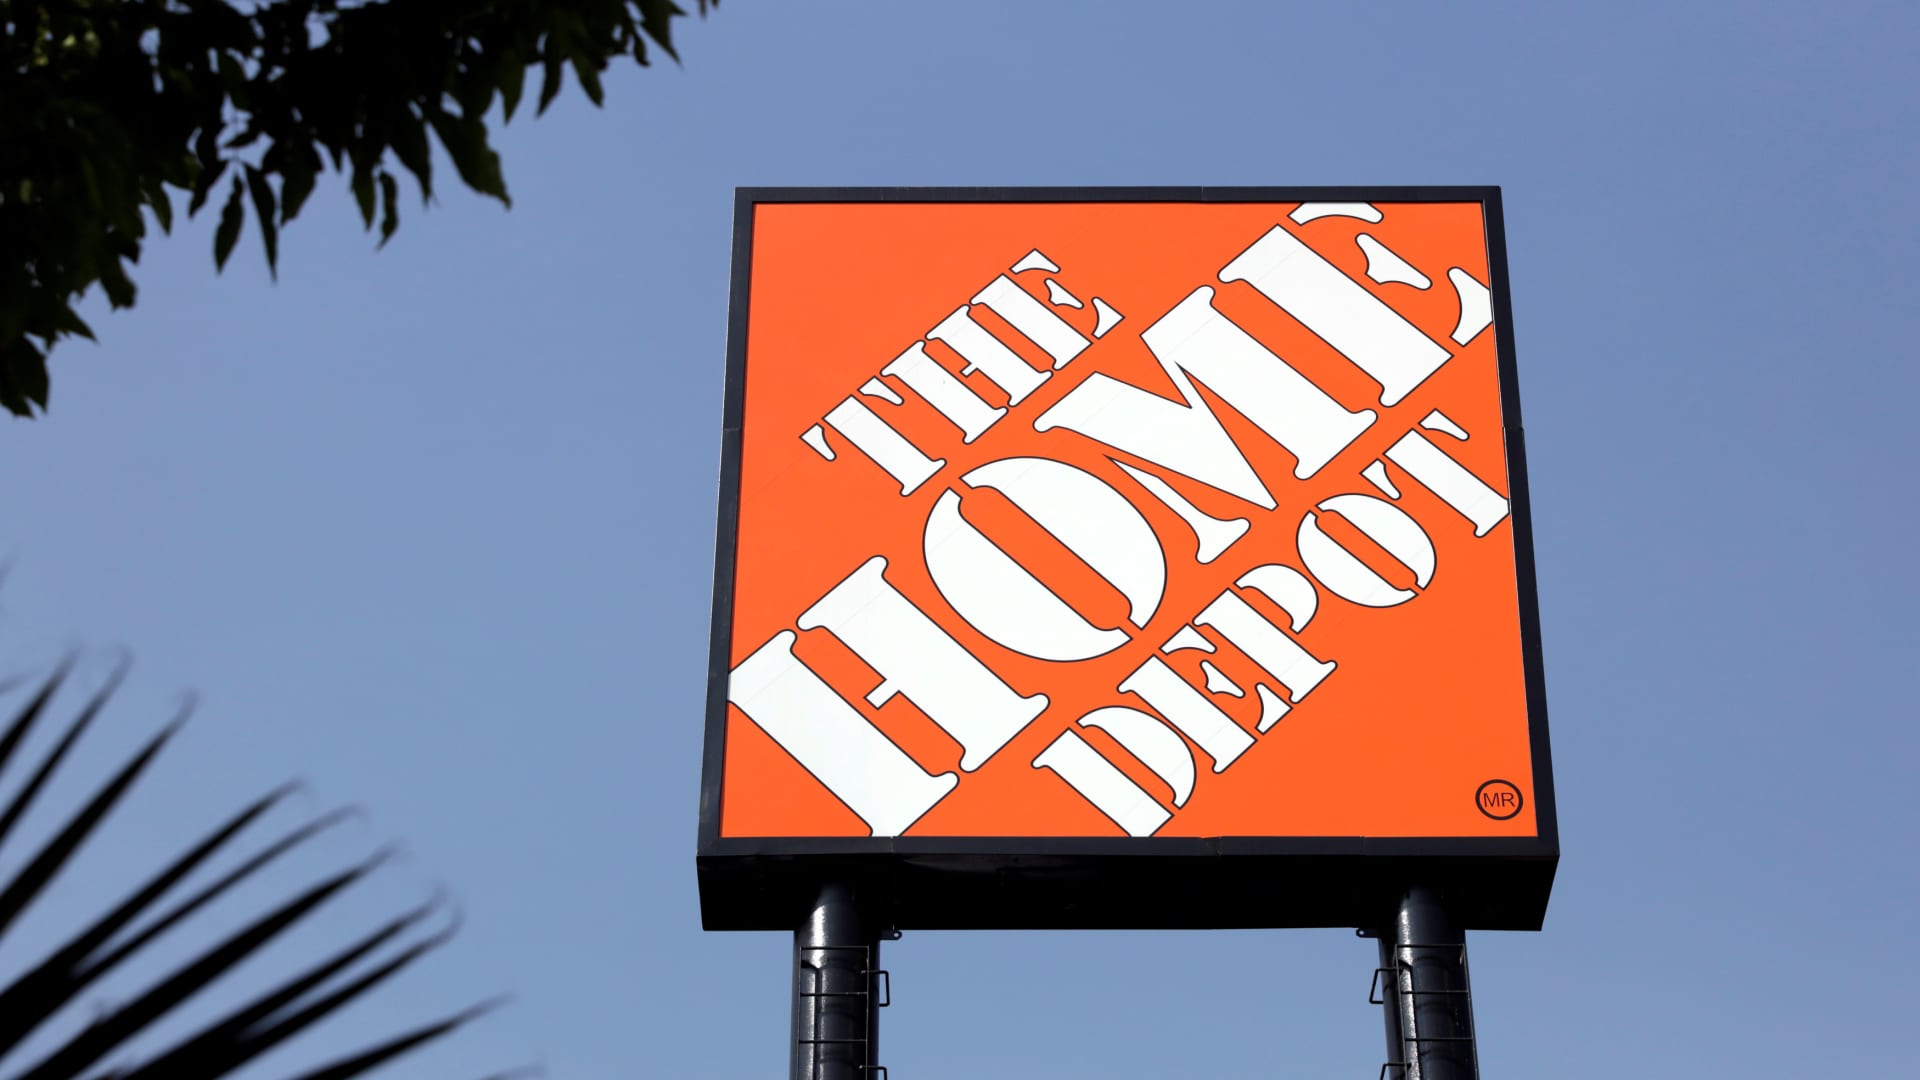 Home Depot will report earnings before the bell. Here’s what to expect